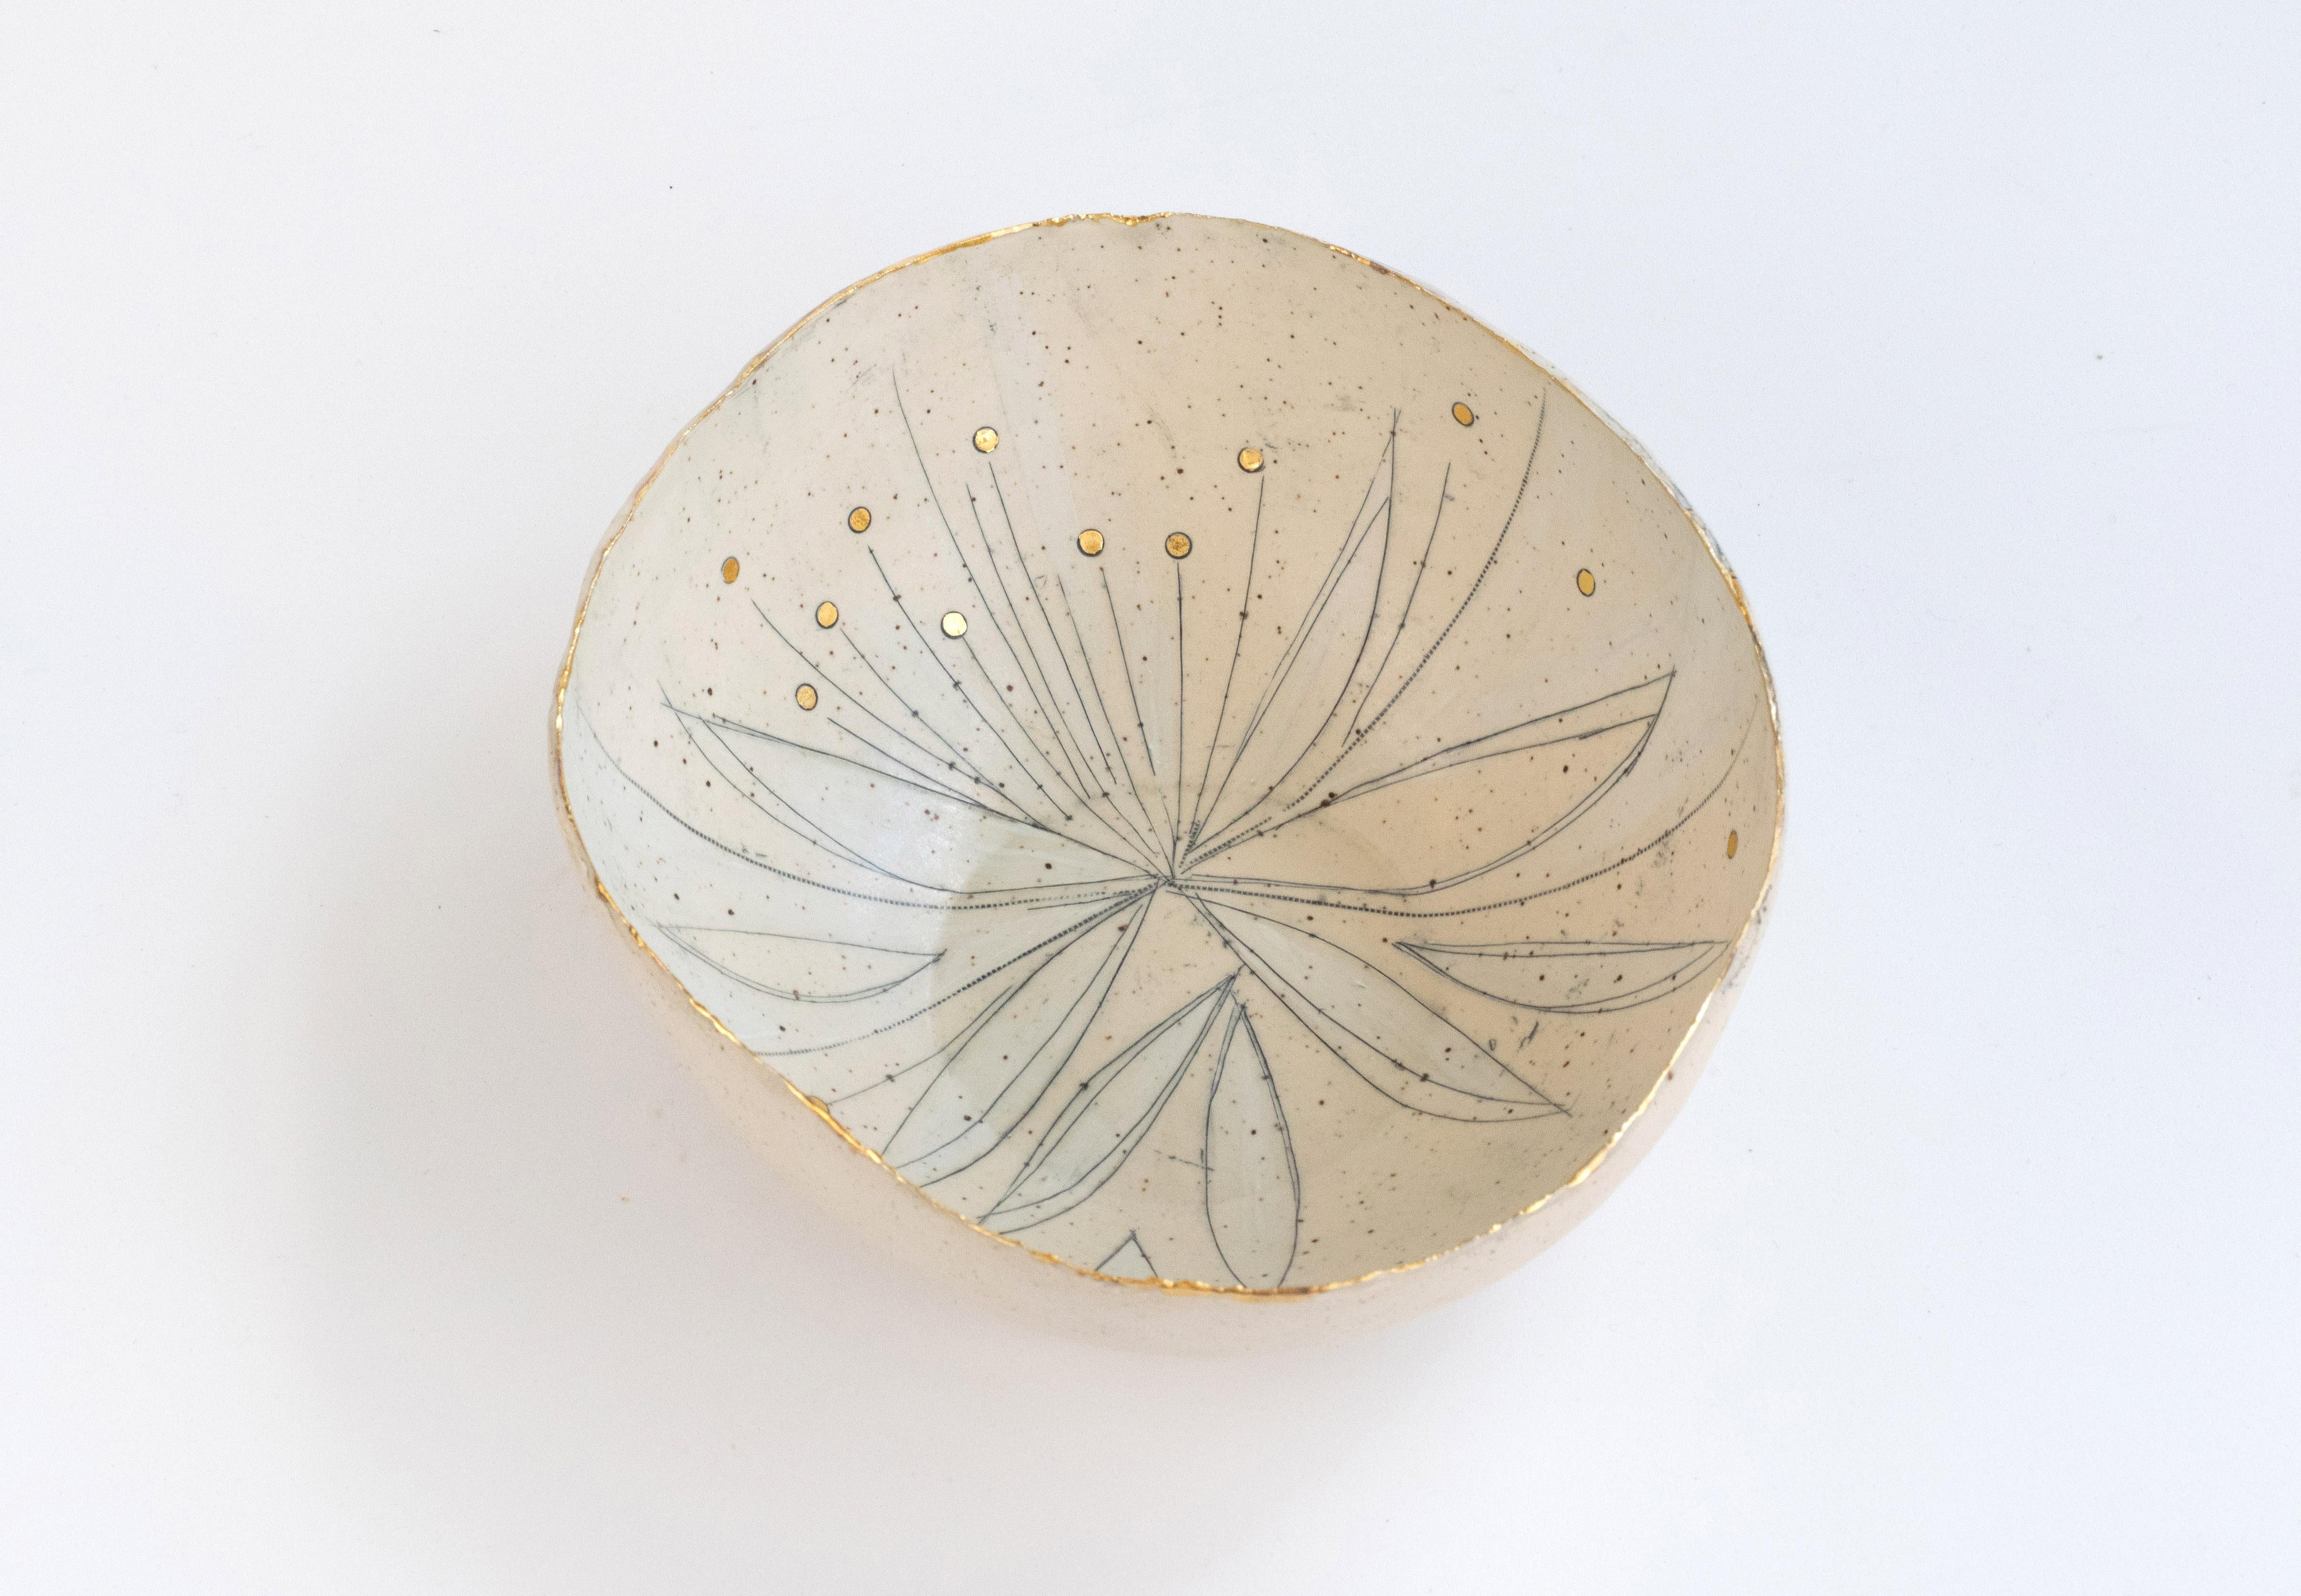 432-G Hand Crafted Golden Springing Stoneware Bowl With 22kt Gold Detail by Helen Prior

A delicate hand-crafted bowl, organic in shape with a torn clay edge in natural speckled stoneware clay.
Part of the Cross Pollination Series - the stylizing